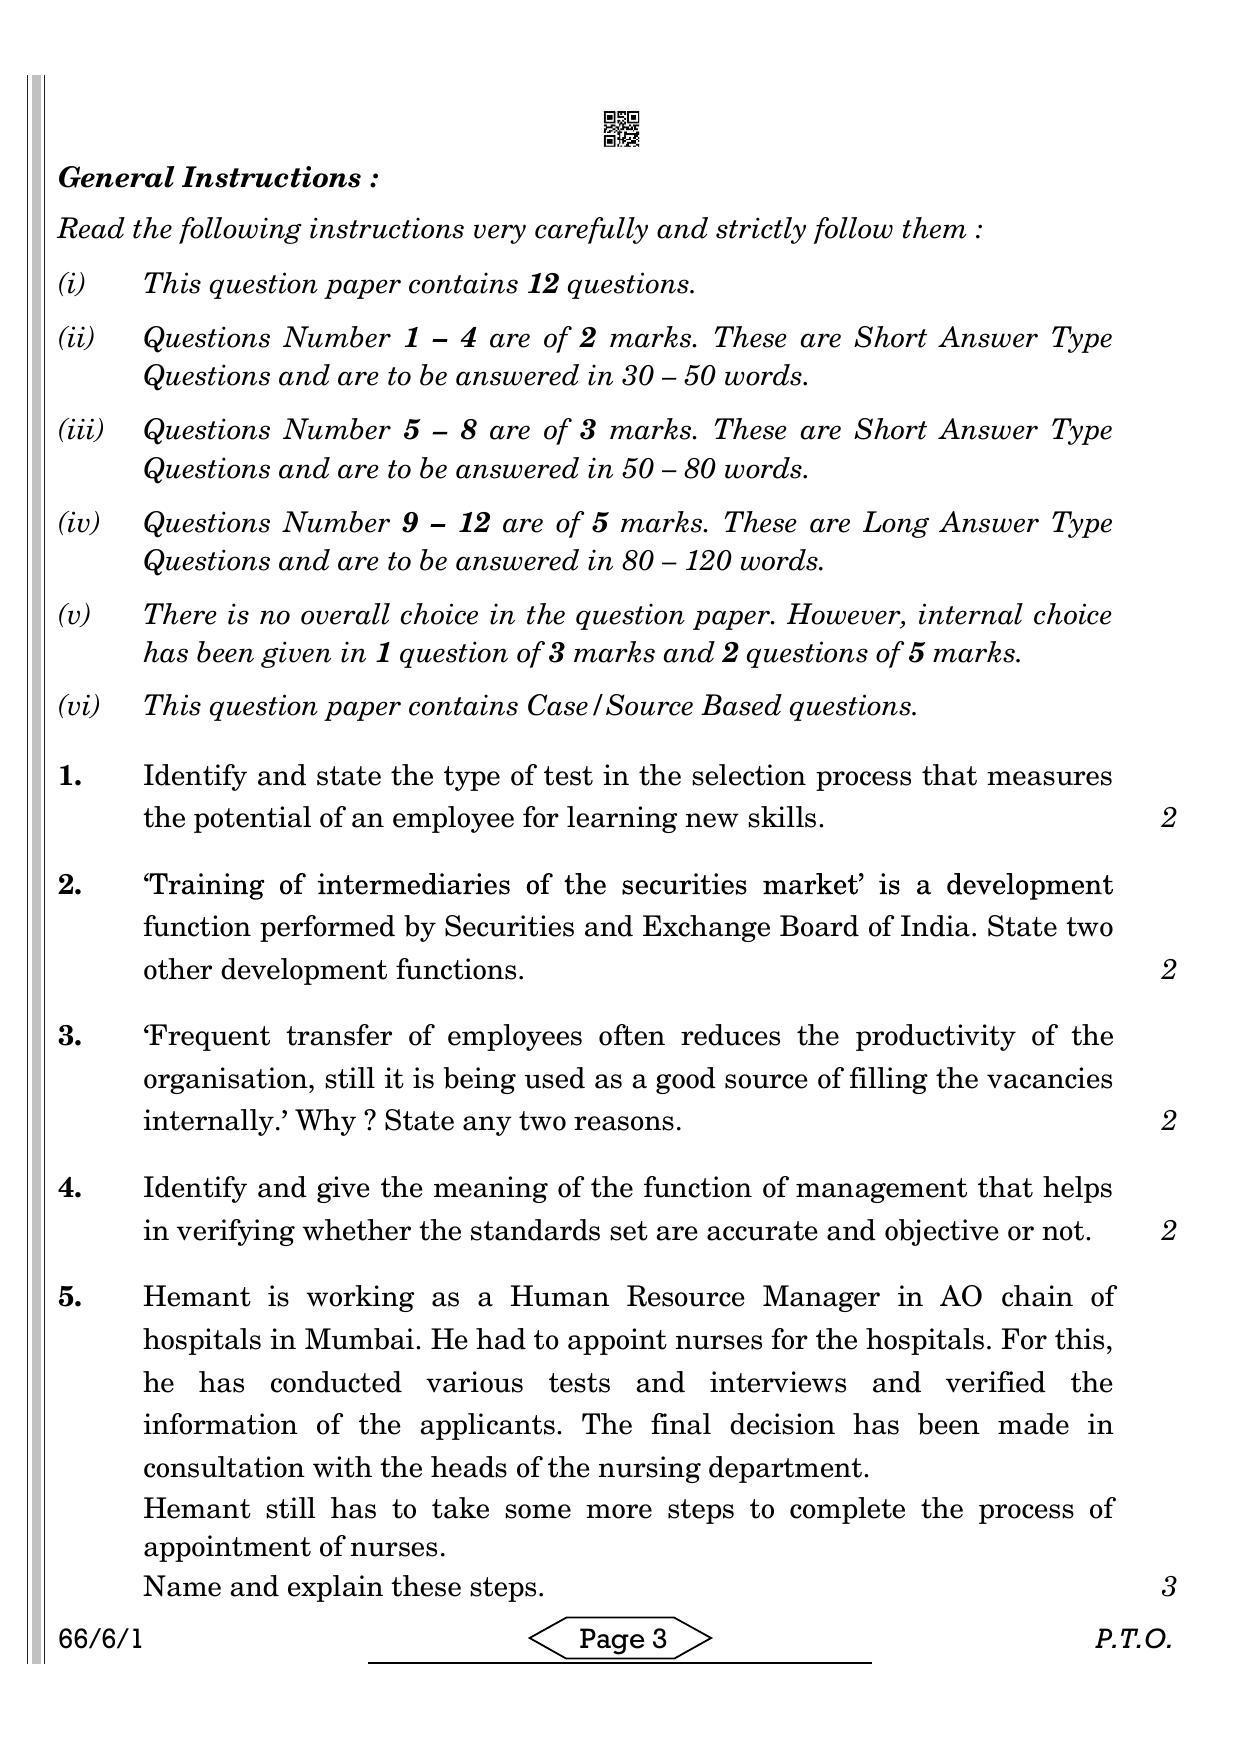 CBSE Class 12 66-6-1 BST 2022 Compartment Question Paper - Page 3